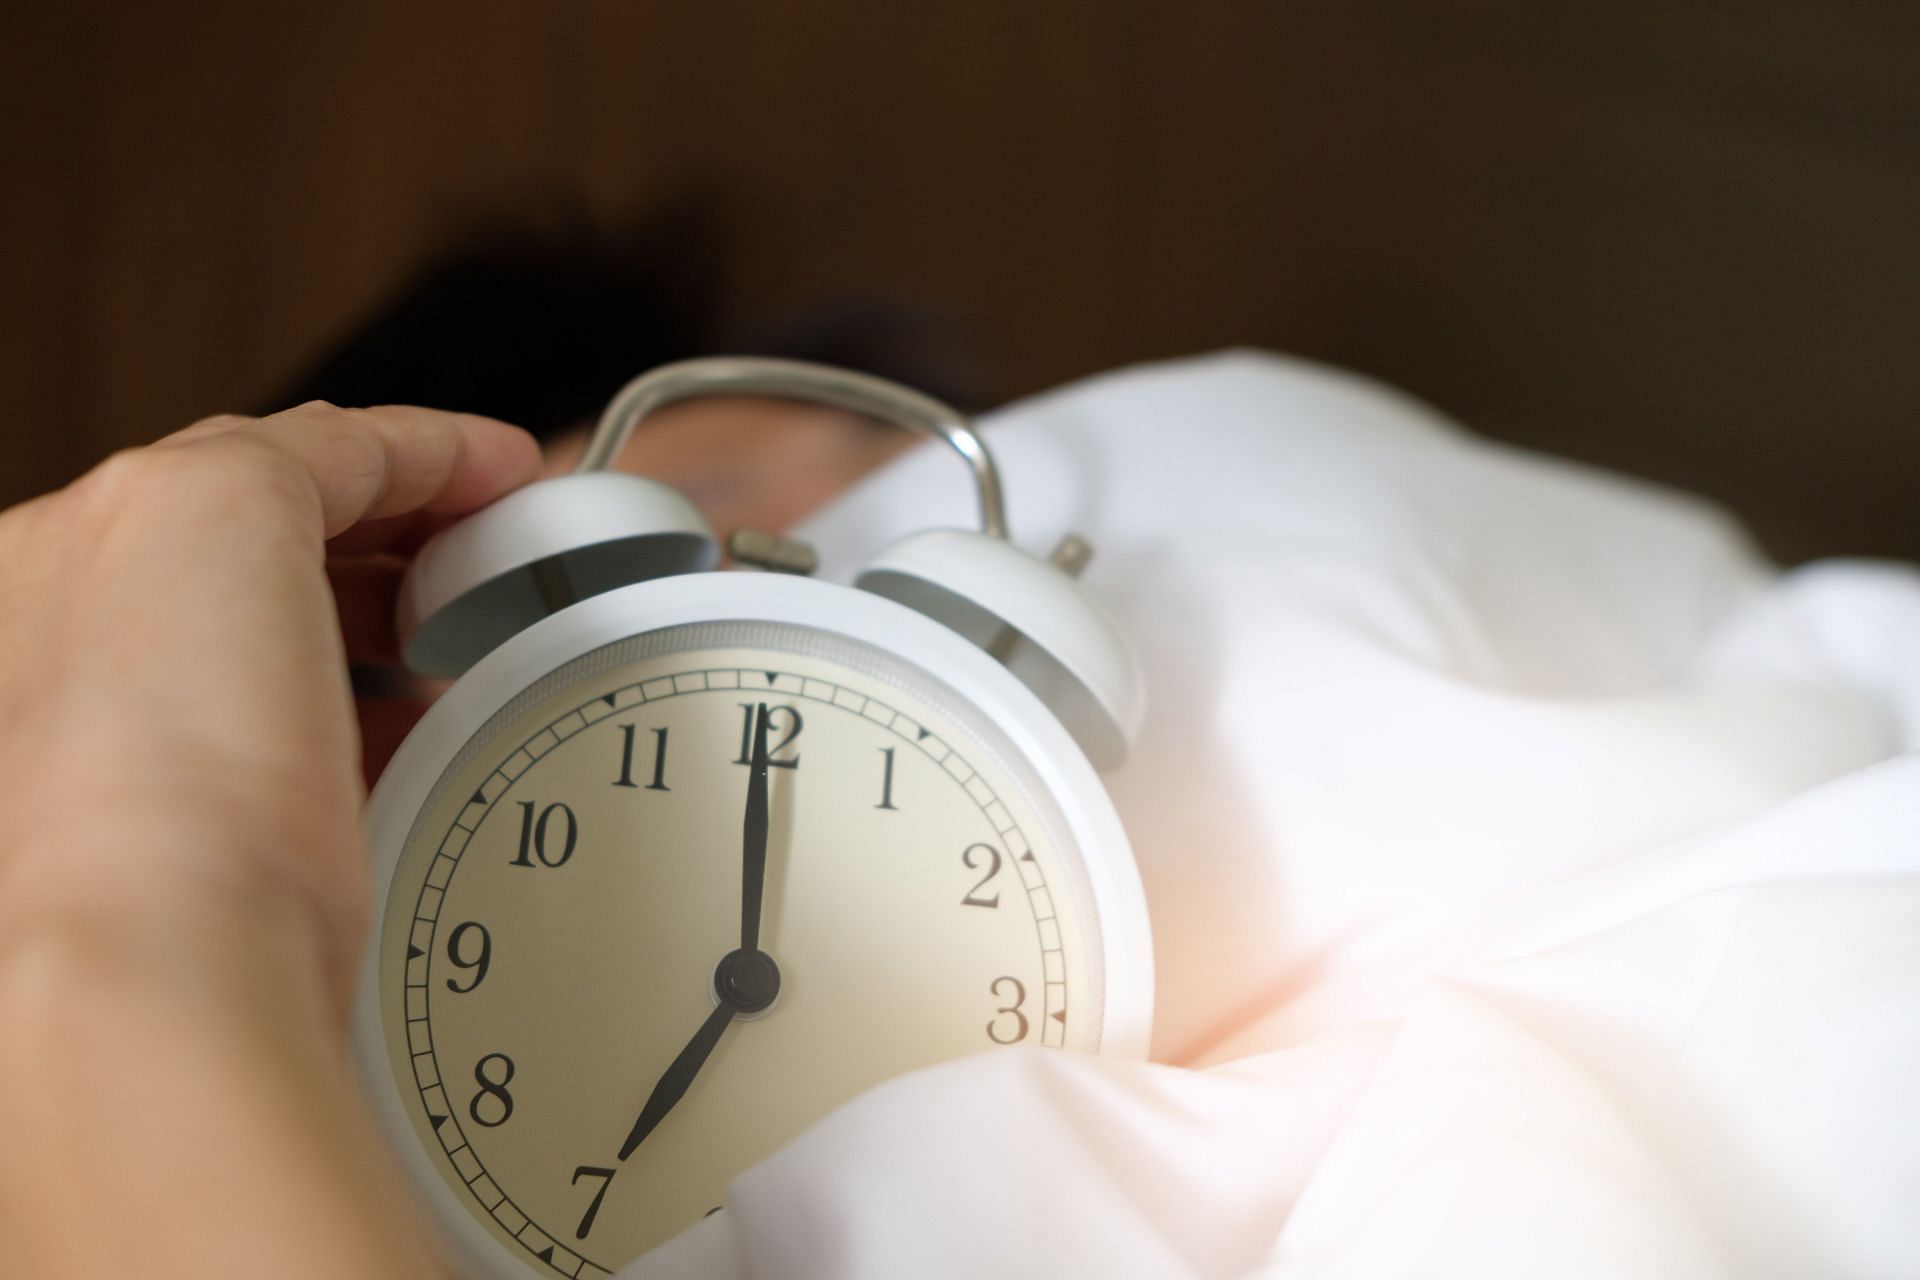 Getting eight hours of sleep per night is proven to contribute to overall health.